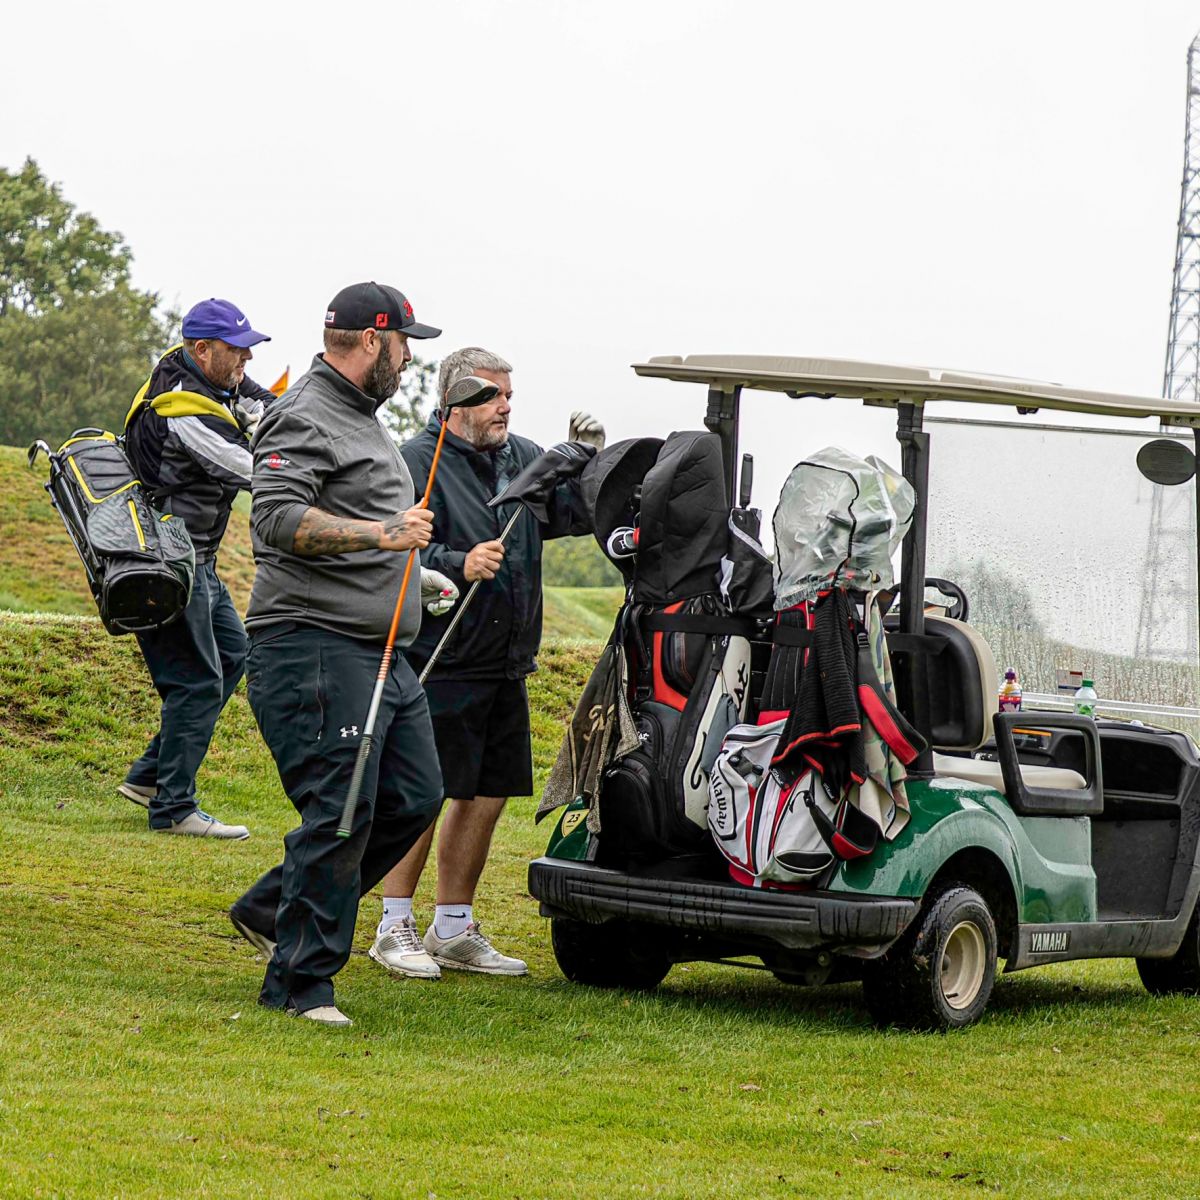 Charity Golf Day - 